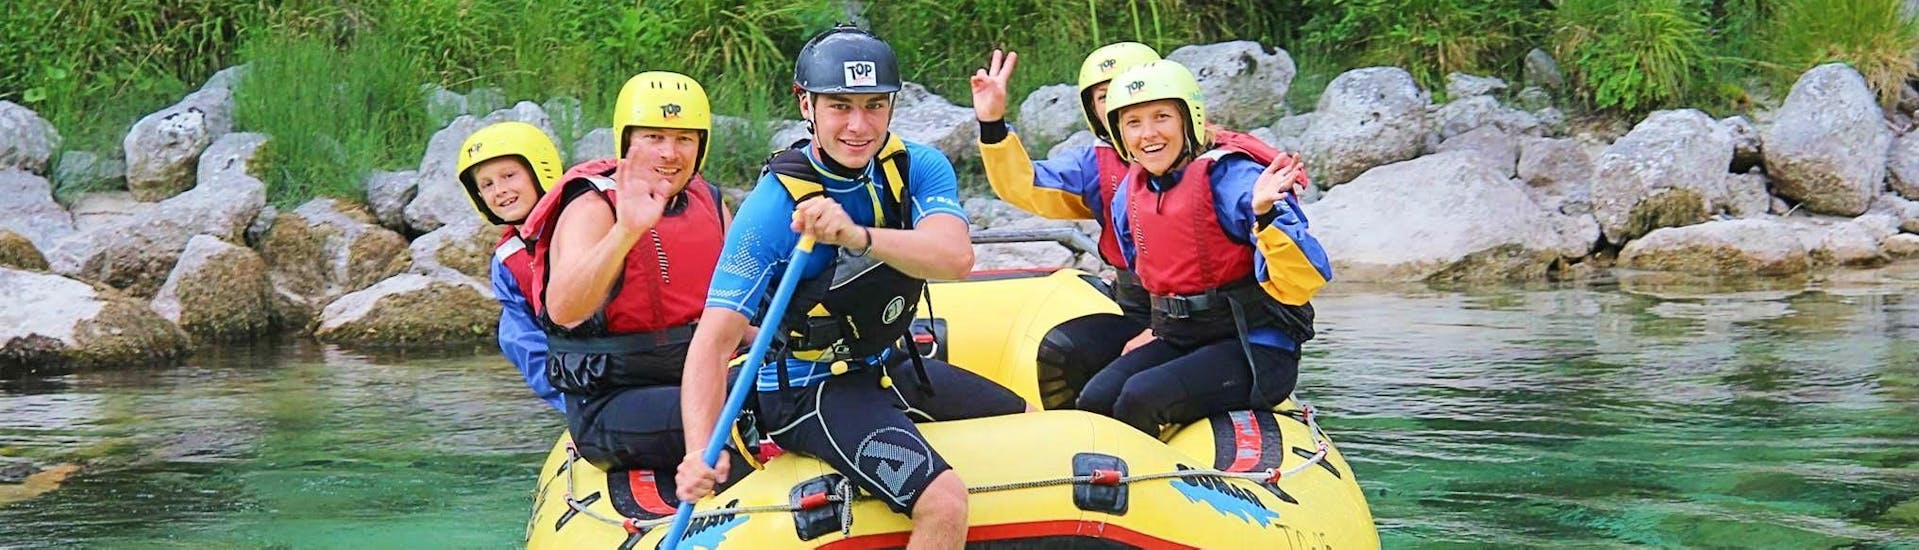 People on the raft during the Rafting on the Soča River for Families with TOP Rafting Centre Bovec.